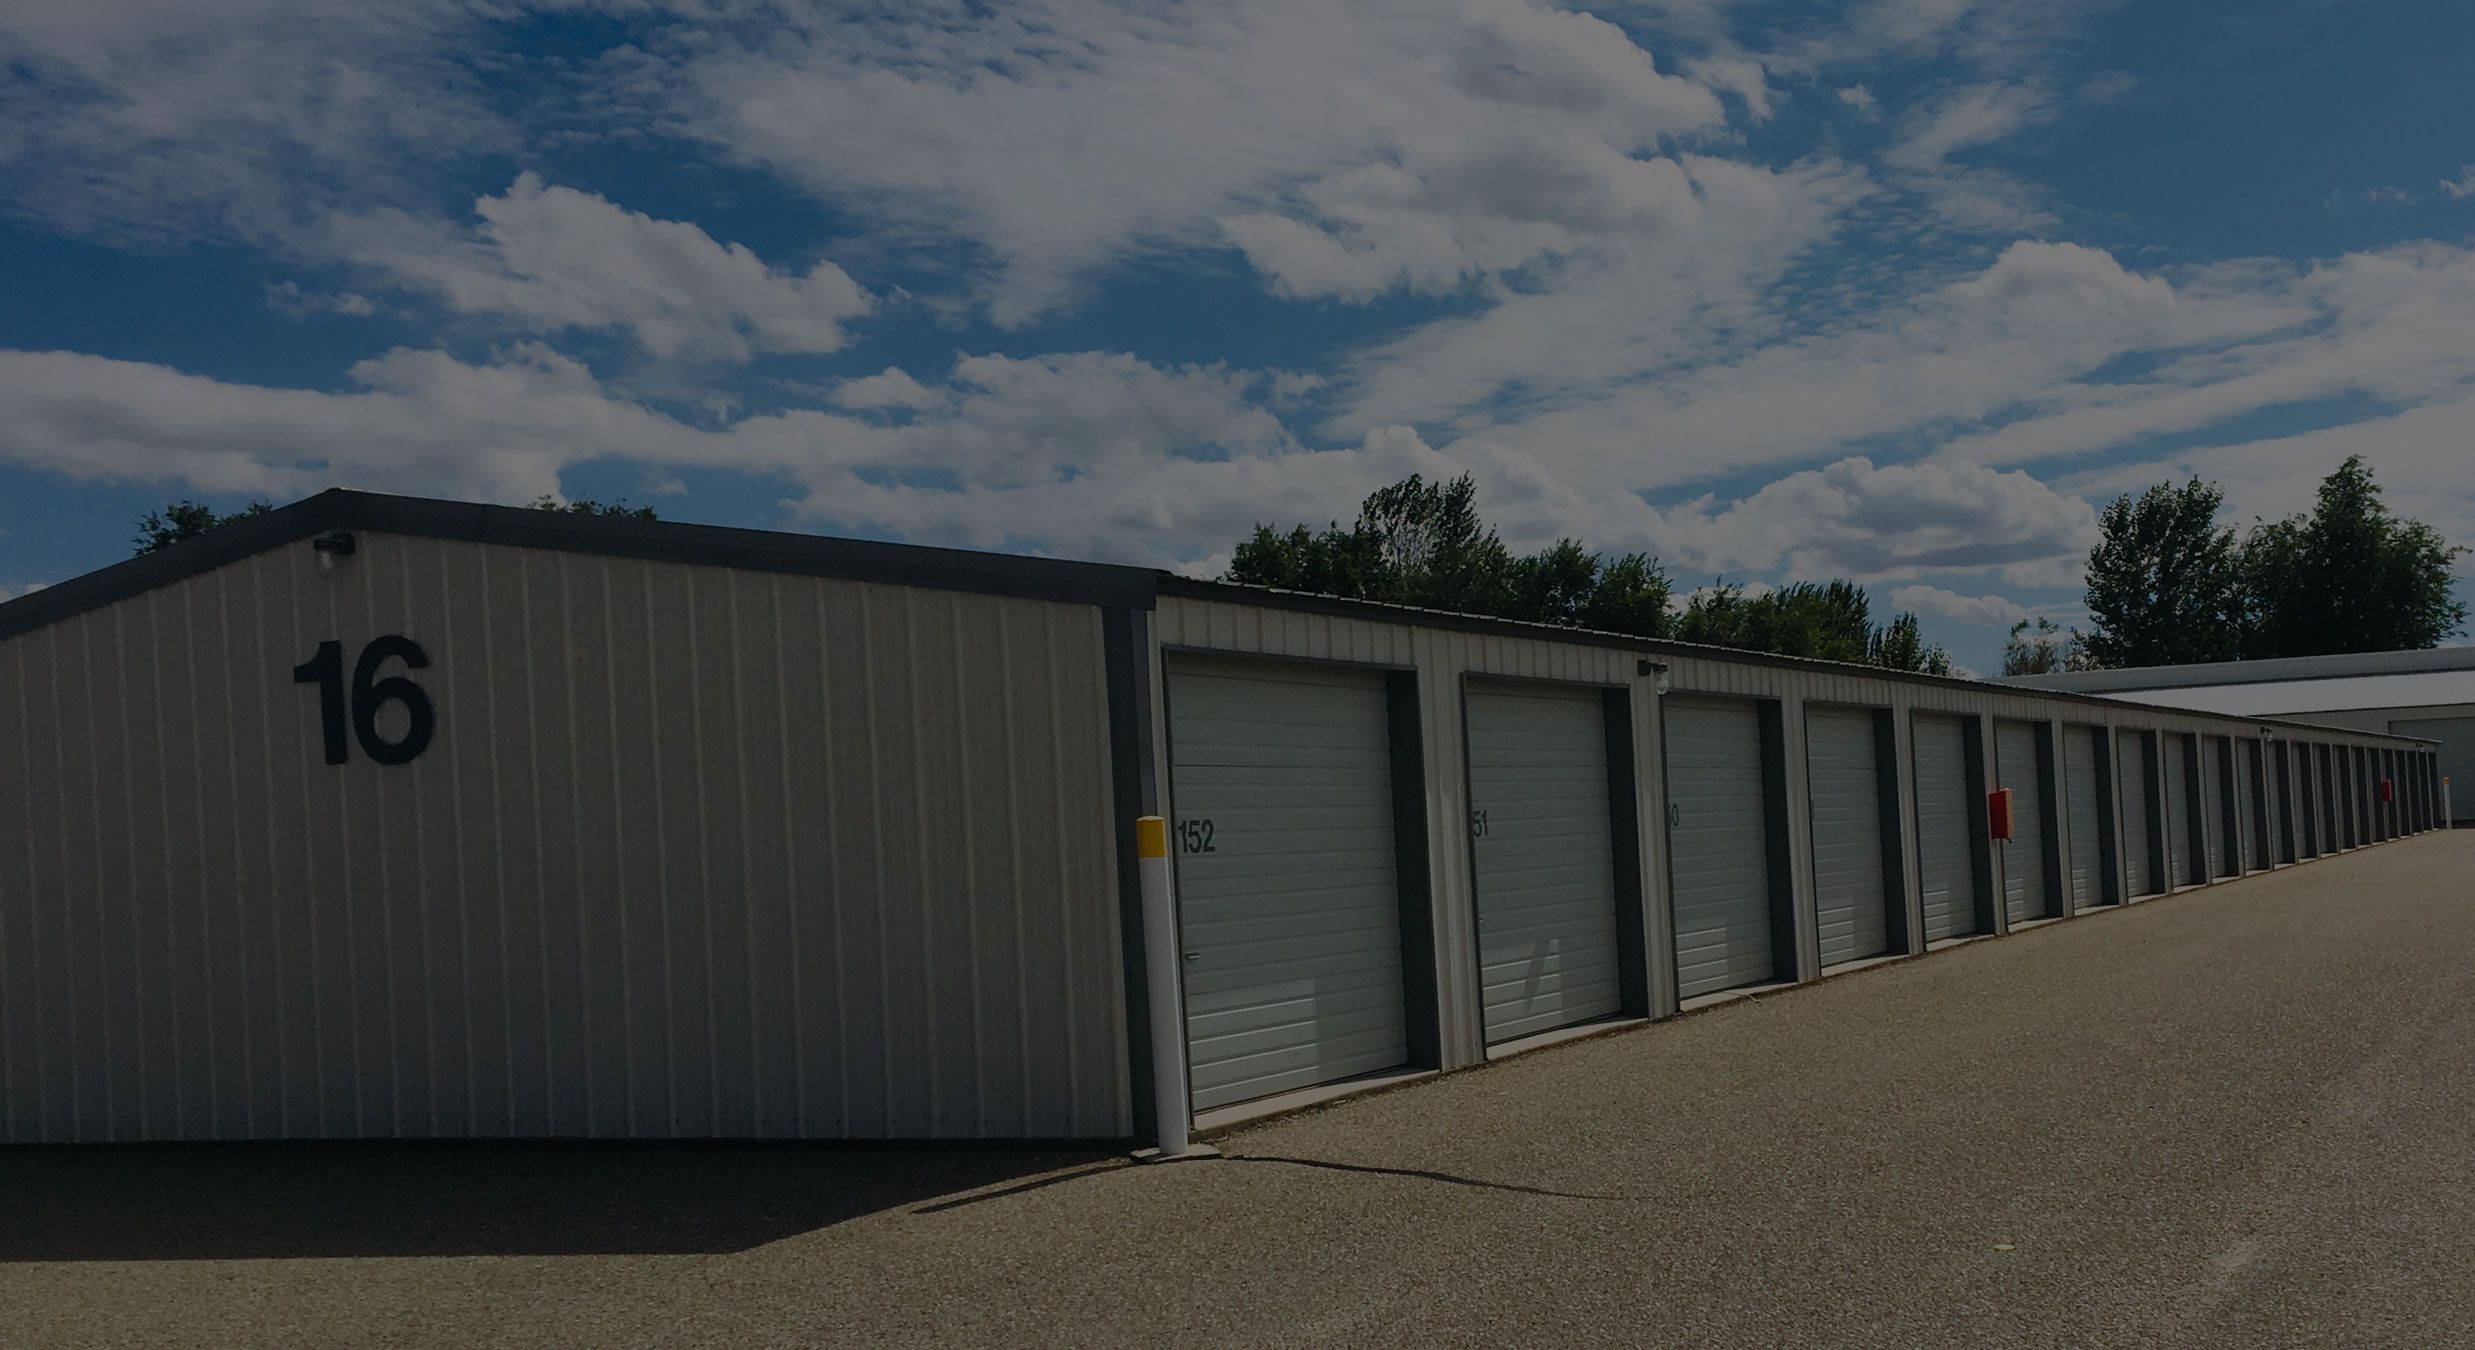 Ground Level Image of Storage Containers | Idaho Storage Connection